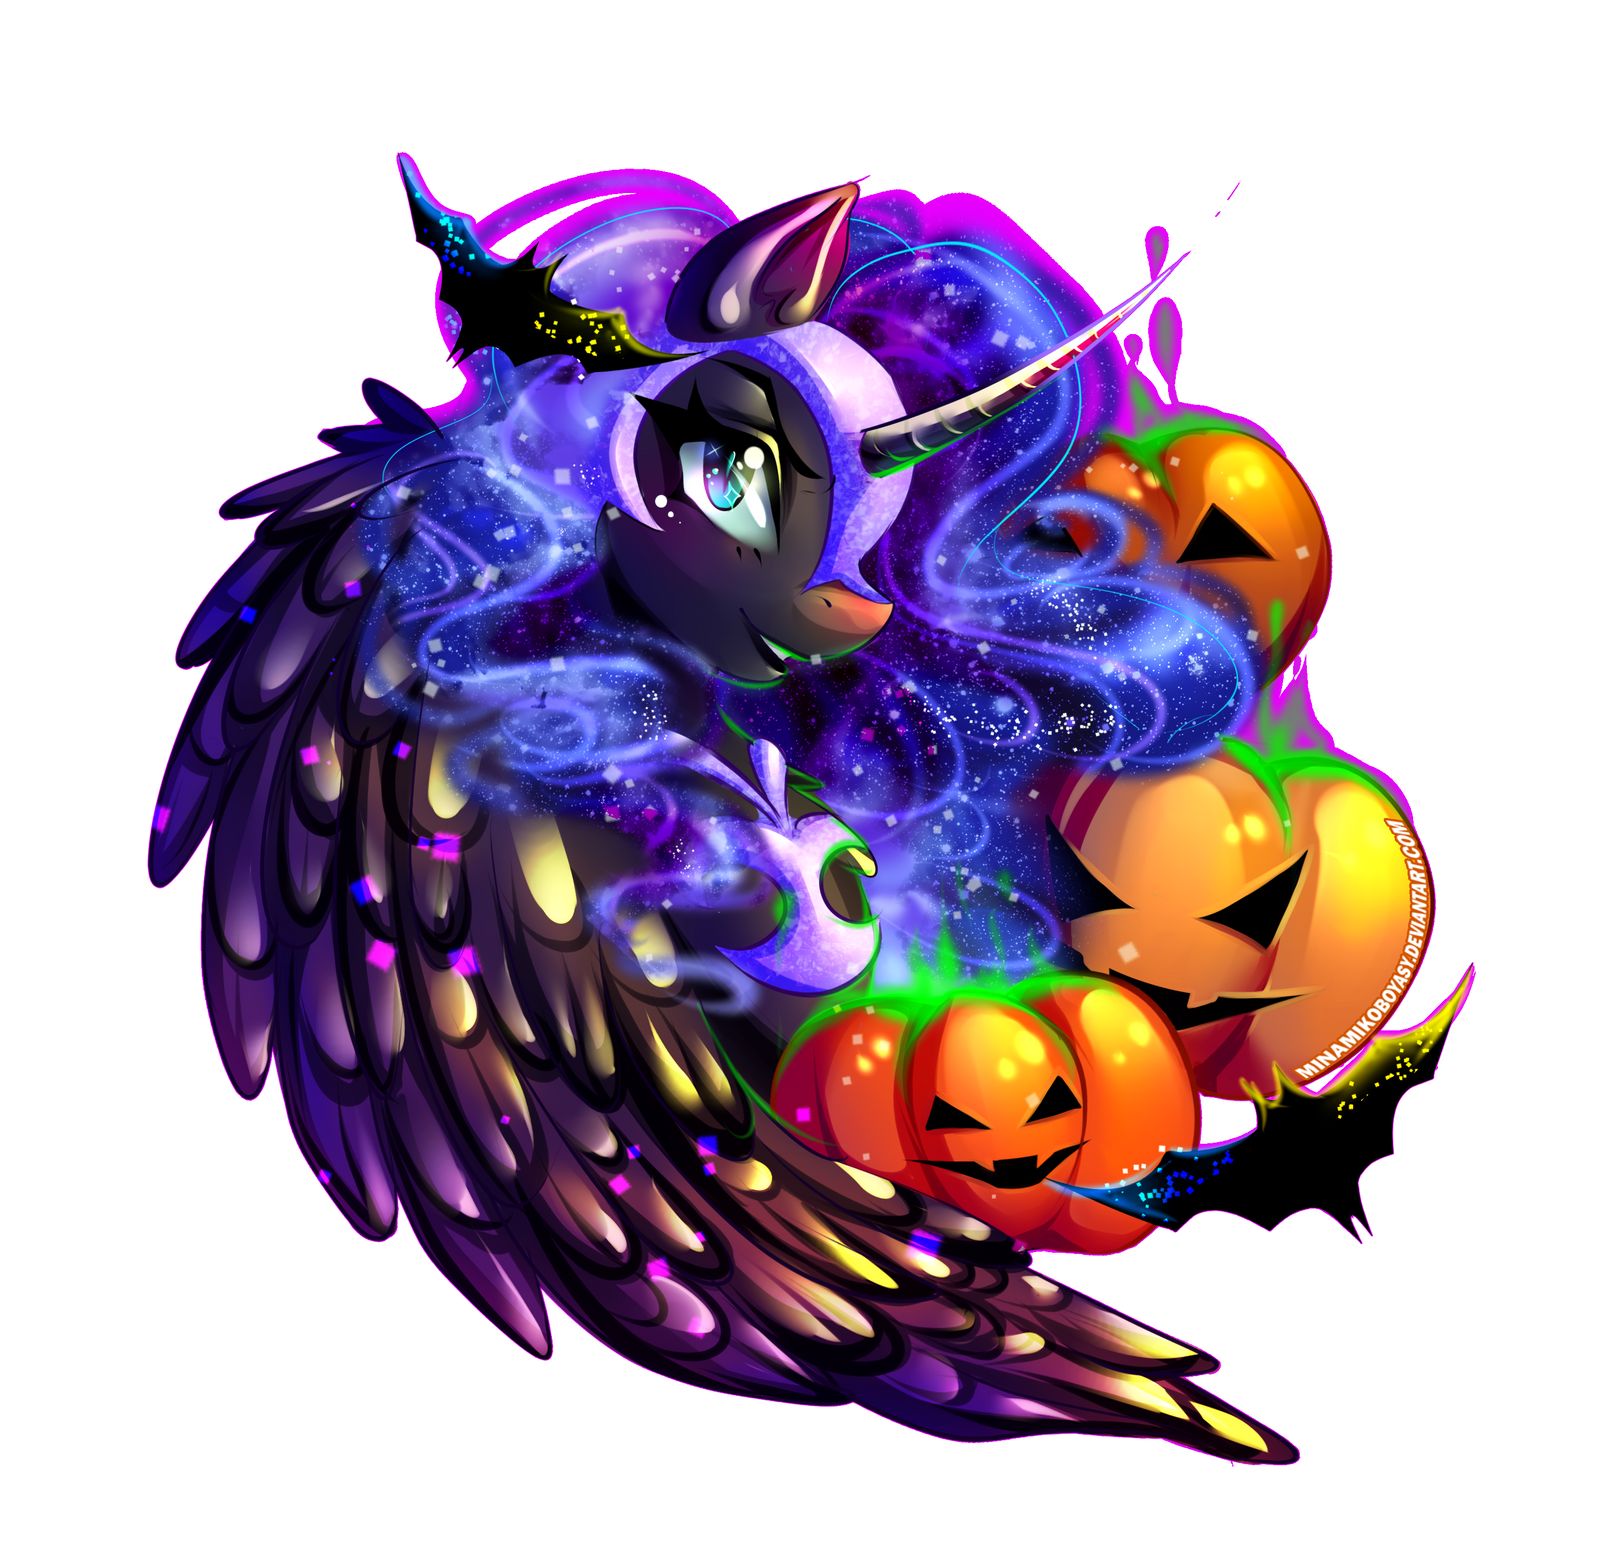 nightmare_moon_by_minamikoboyasy_dcpnwx9-fullview.png